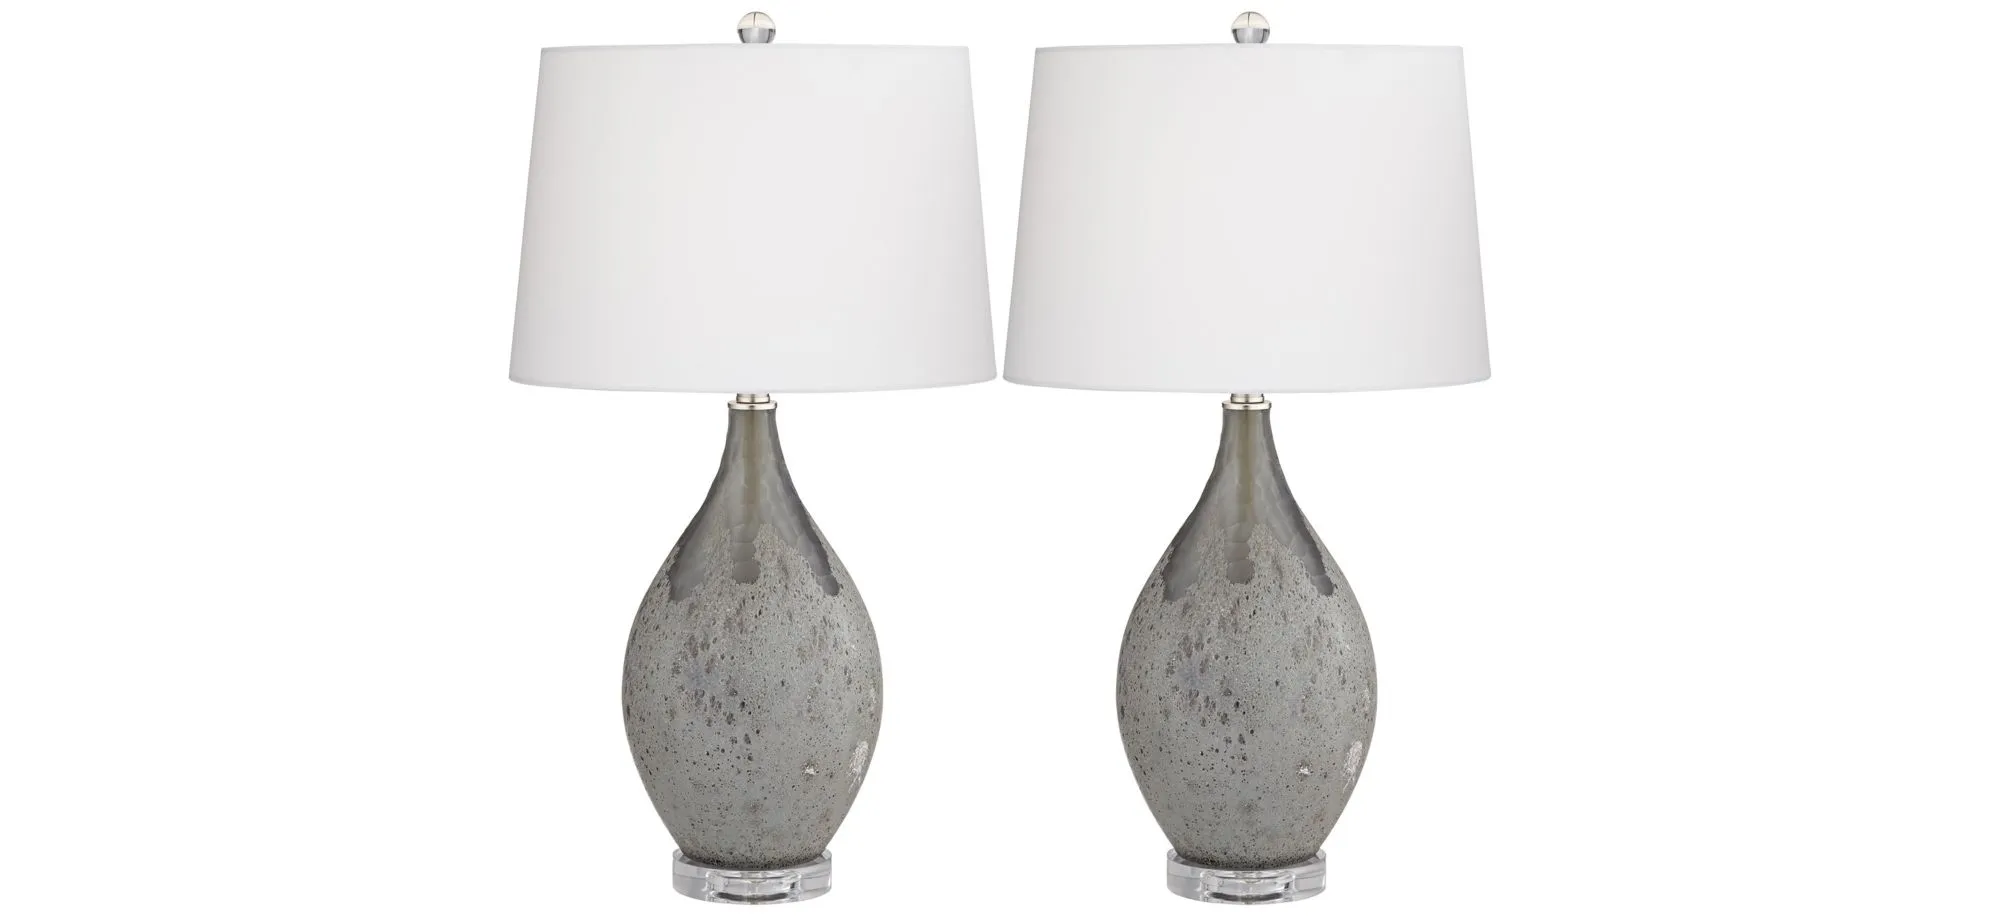 Volcanic Shimmer Table Lamps: Set of 2 in Smoke Grey by Pacific Coast